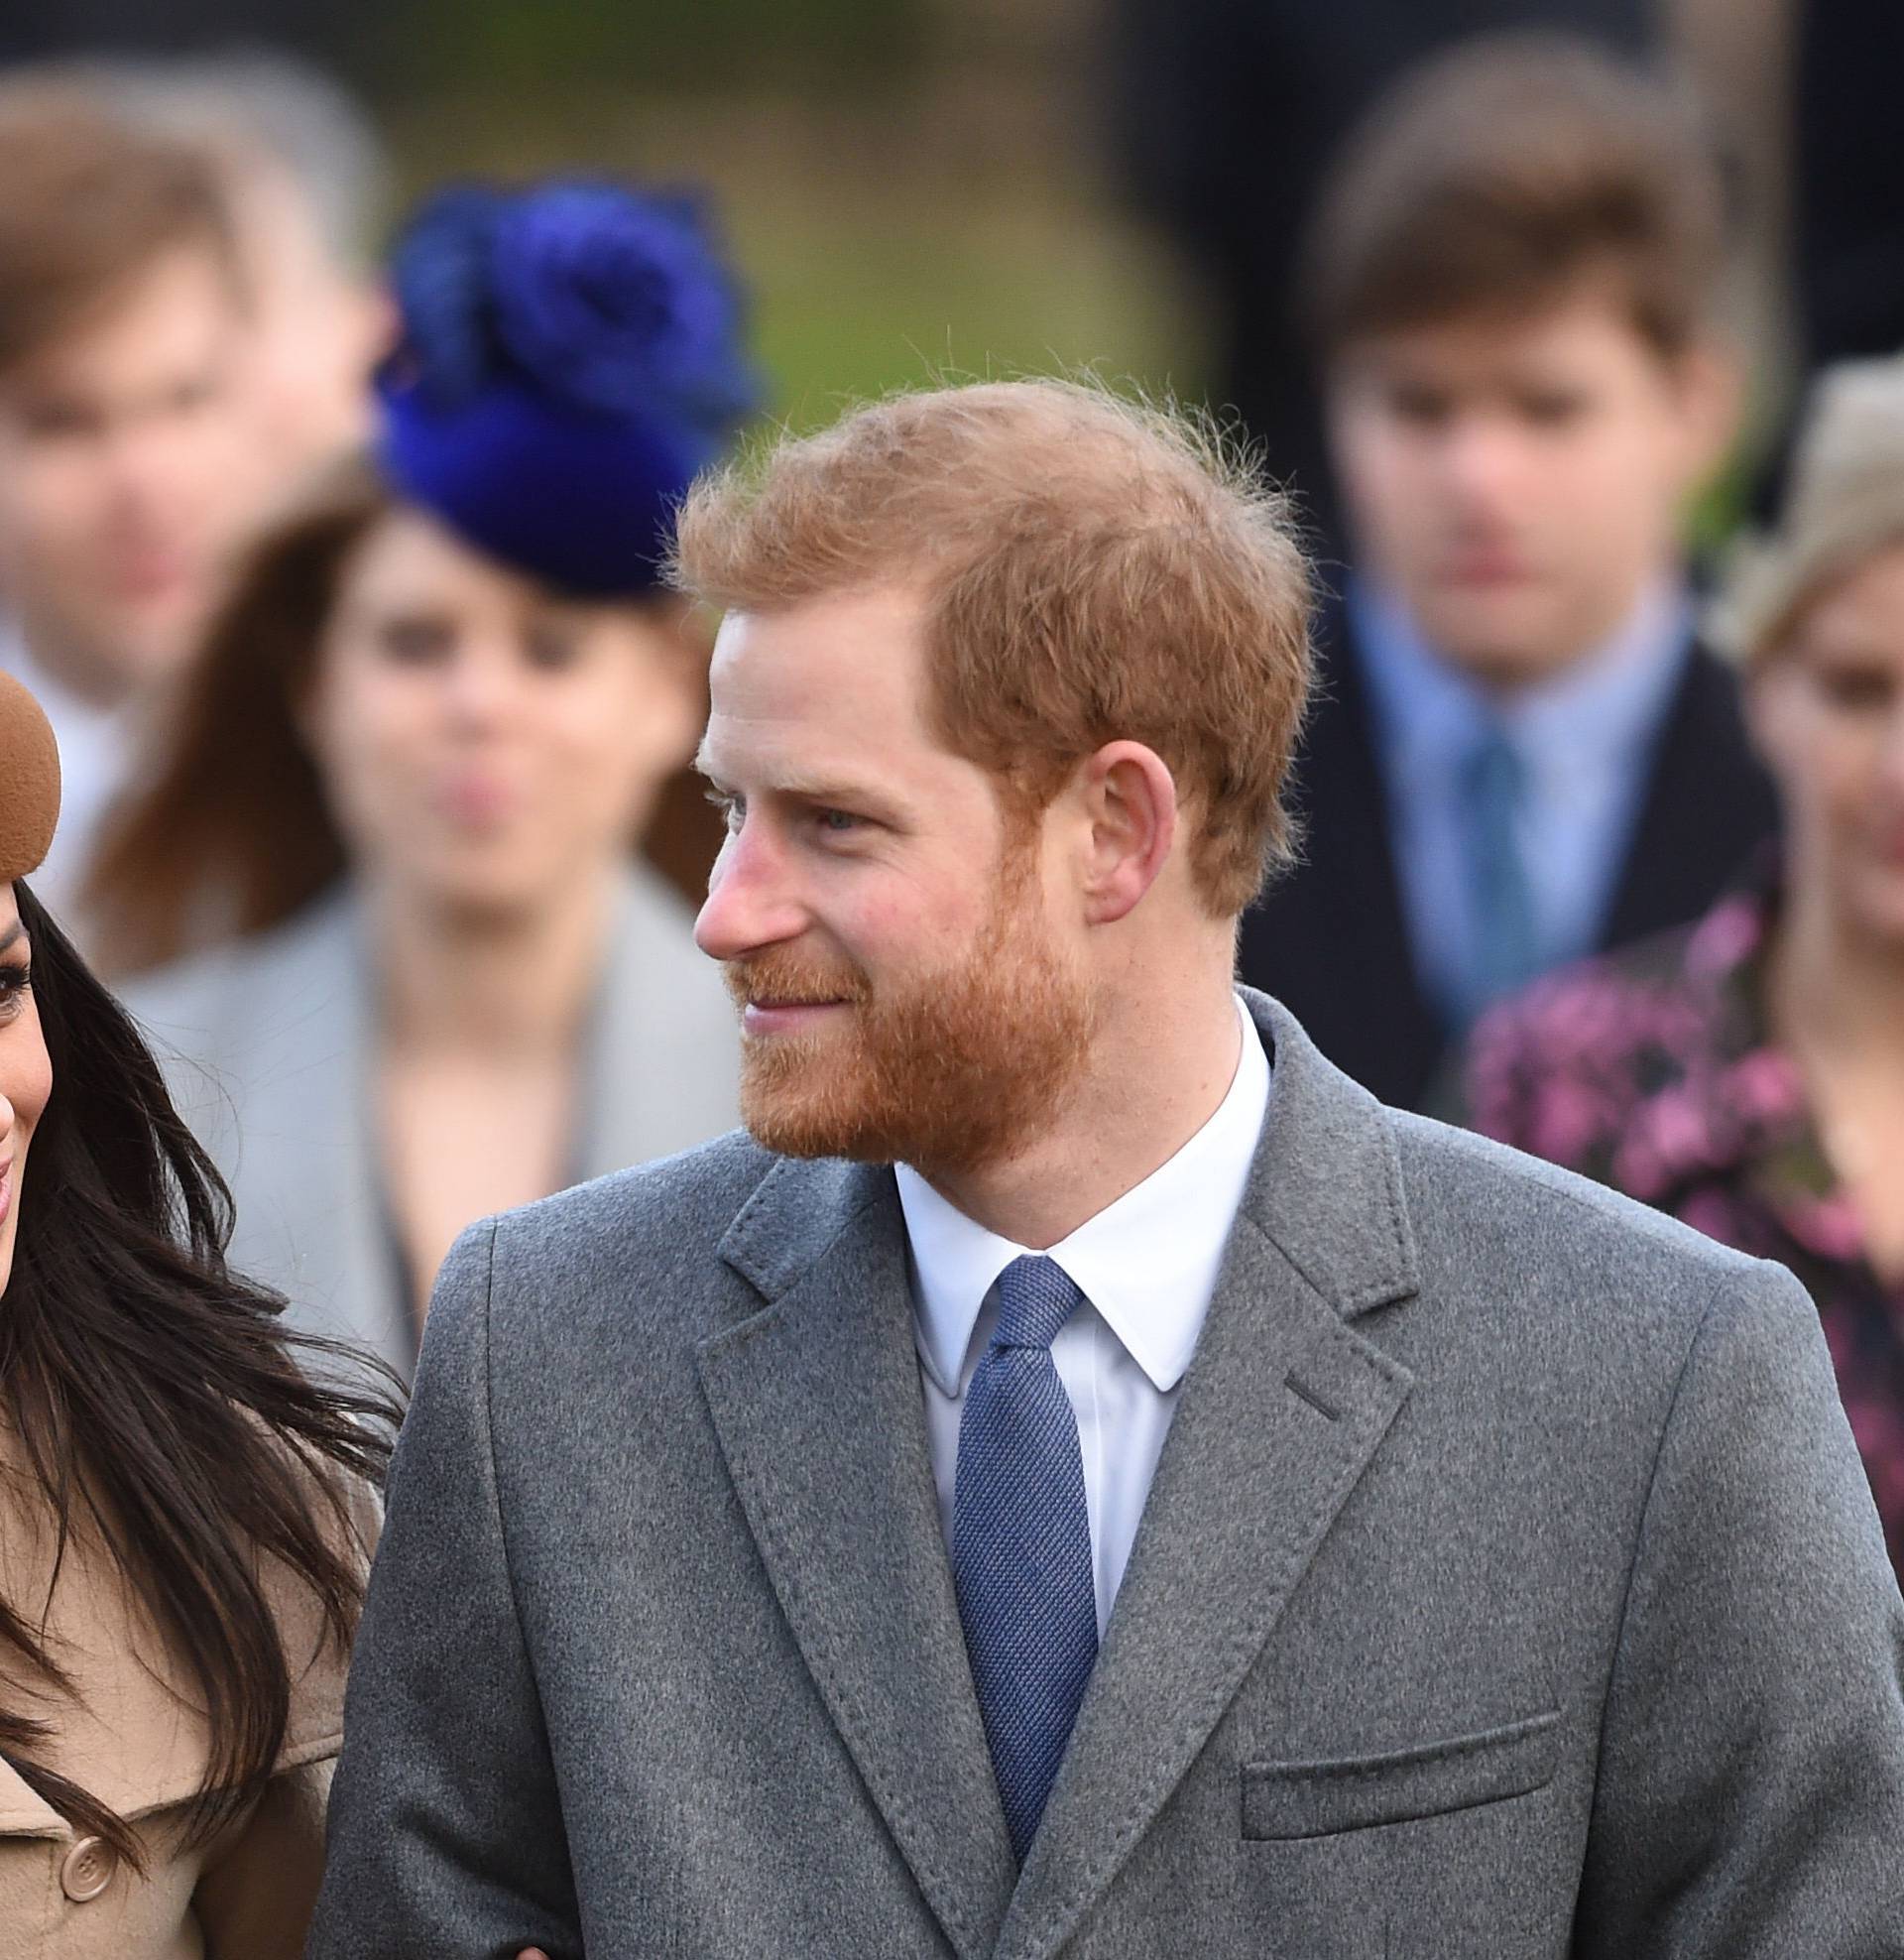 Royals attends Christmas Day Church service